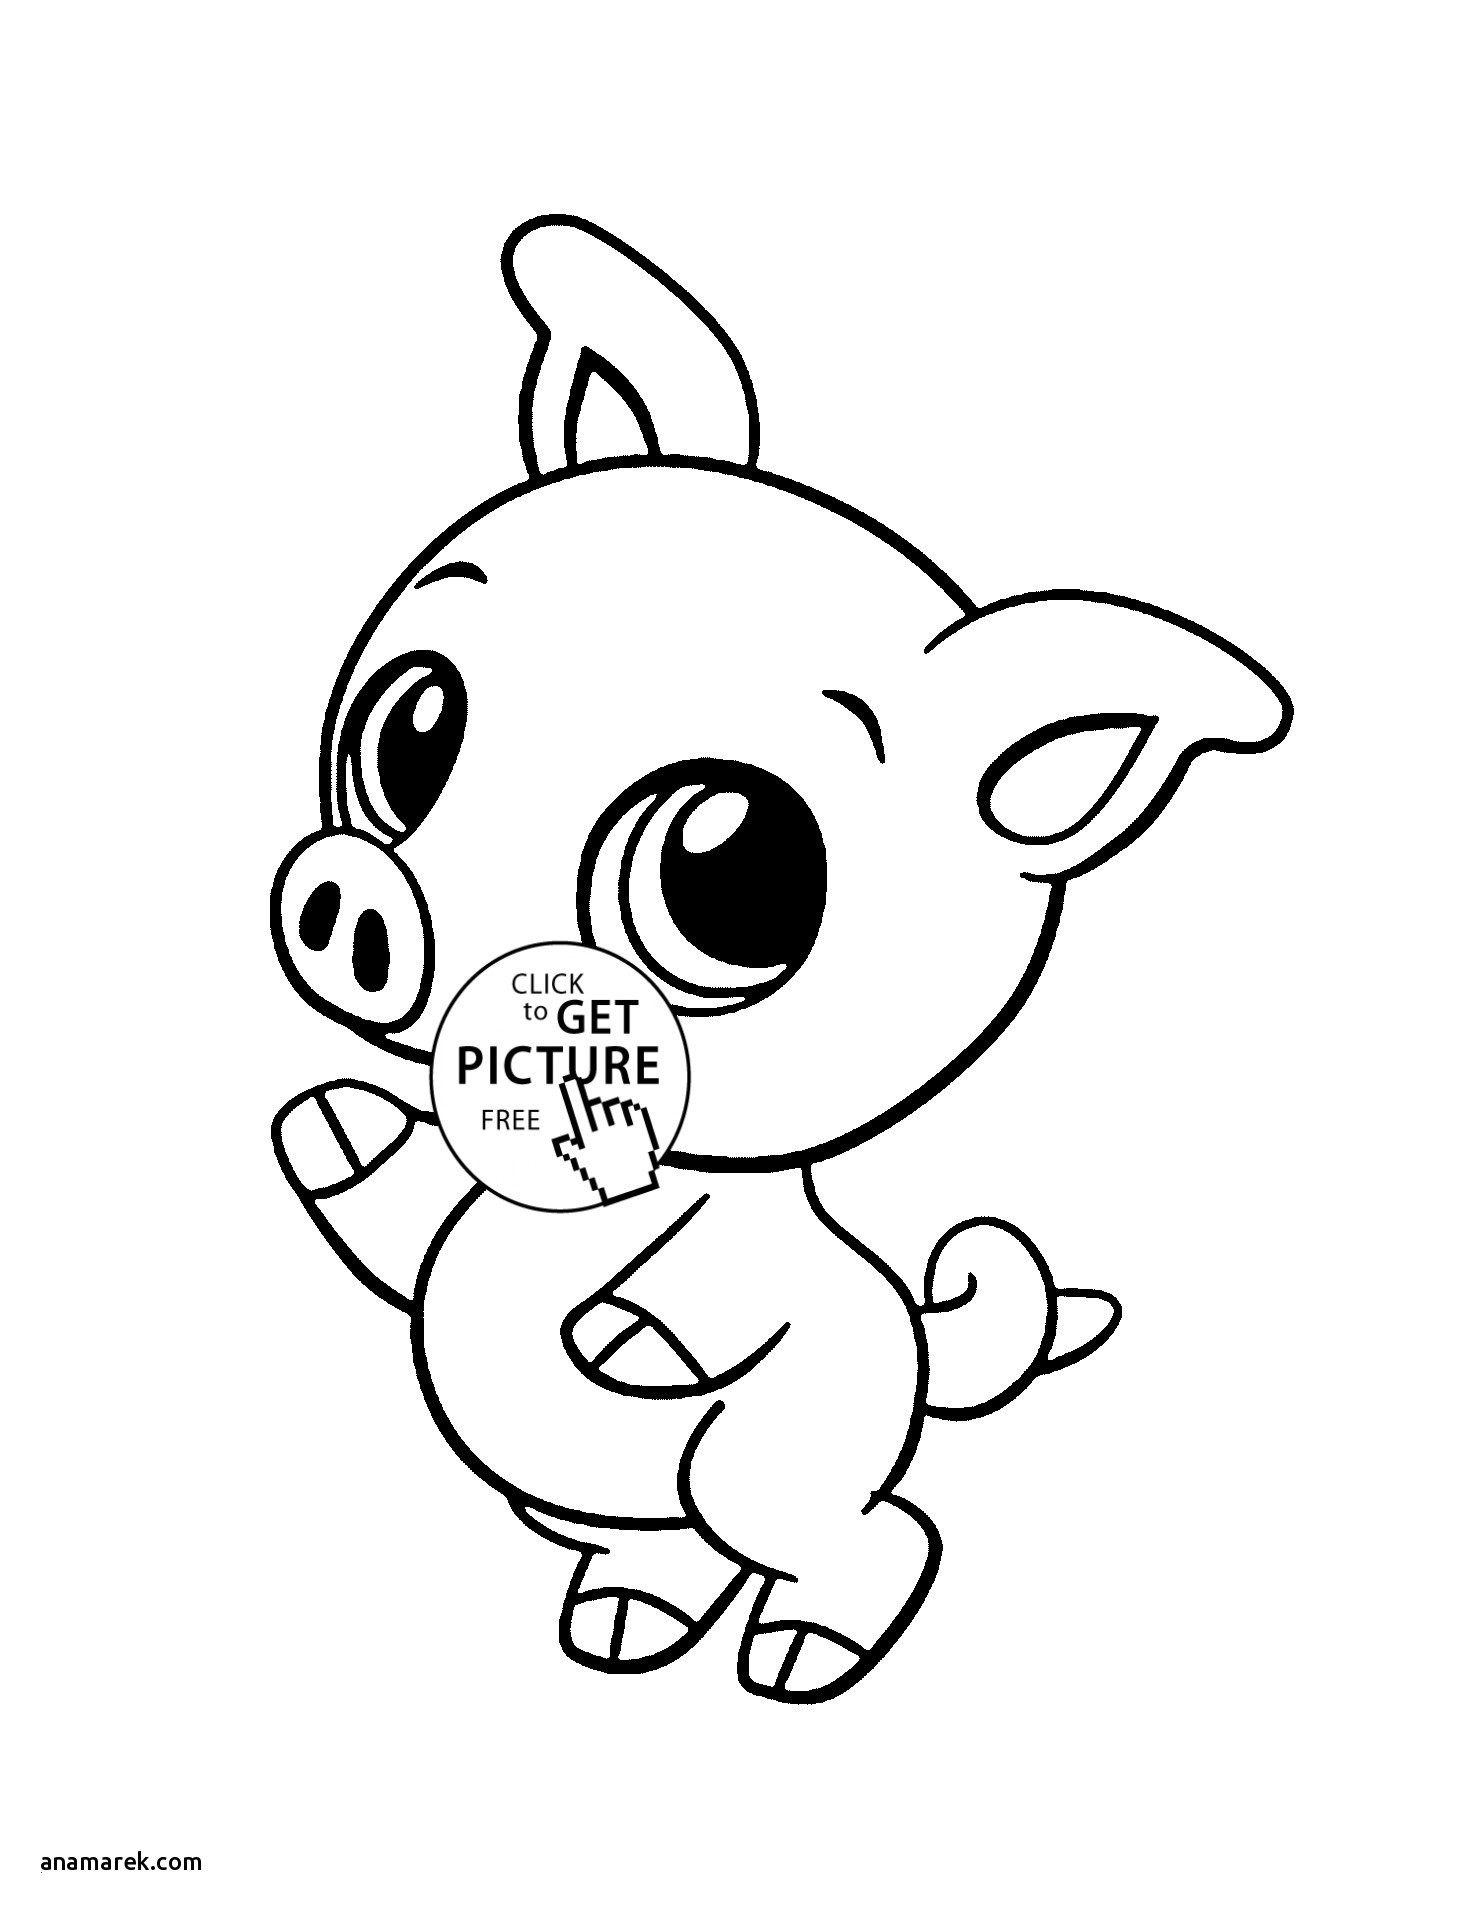 Baby Animal Coloring Pages New Baby Animal Coloring Pages Lovely Fresh Media Cache Ec0 Pinimg